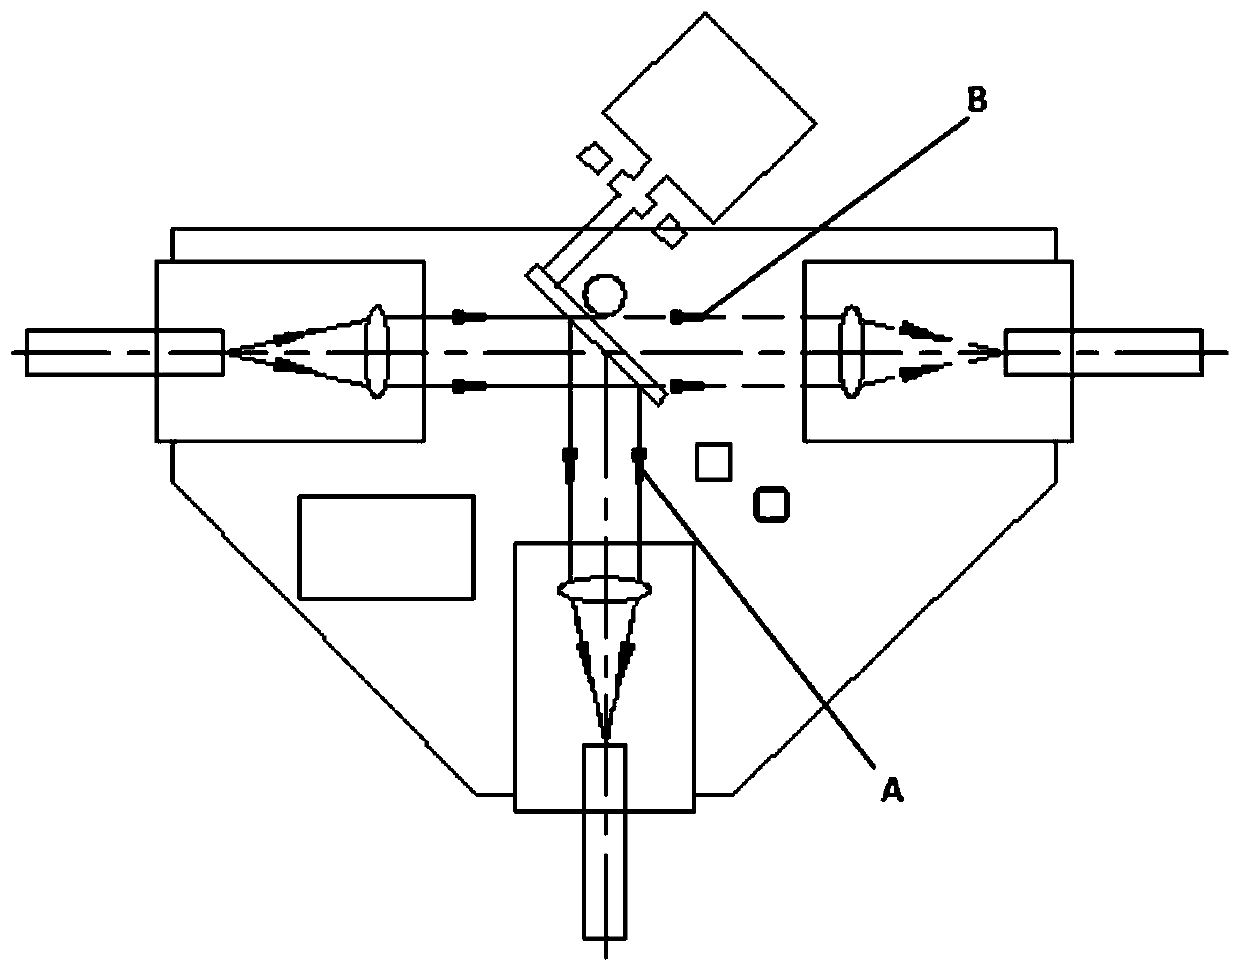 T-shaped switching device for high-power optical fiber laser light path